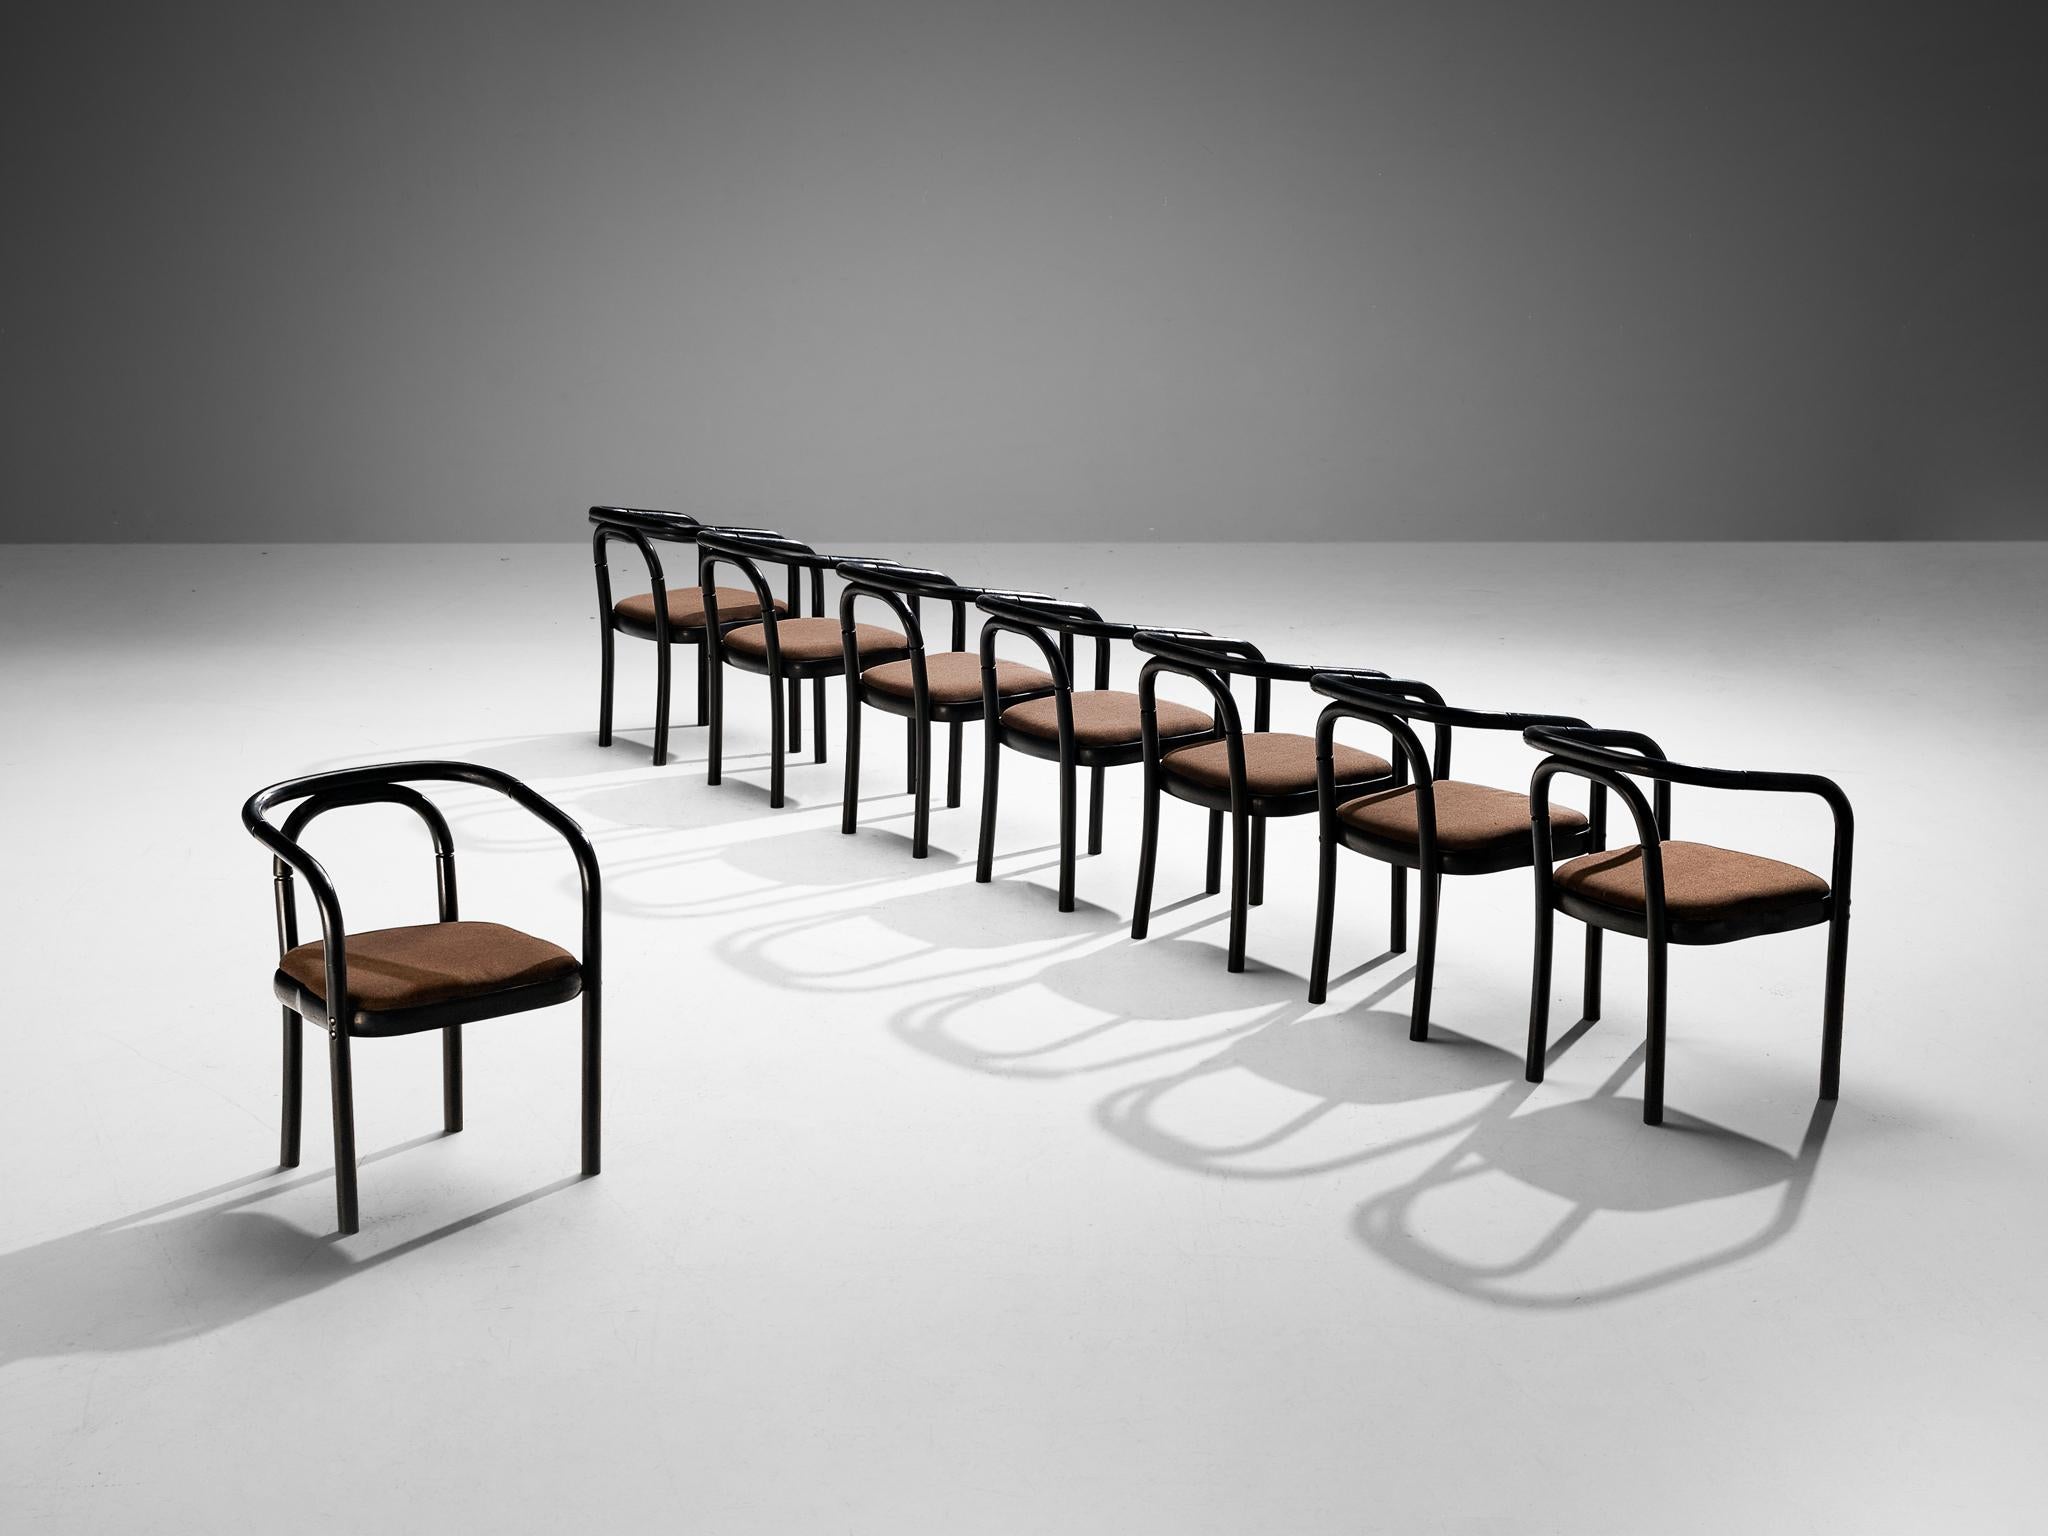 Antonin Suman for TON, set of eight armchairs, model E4309, lacquered wood, fabric, Czech Republic, 1977

A set of eight dining chairs that were designed by Antonin Suman and manufactured by TON. These chairs feature a wonderful bentwood frame